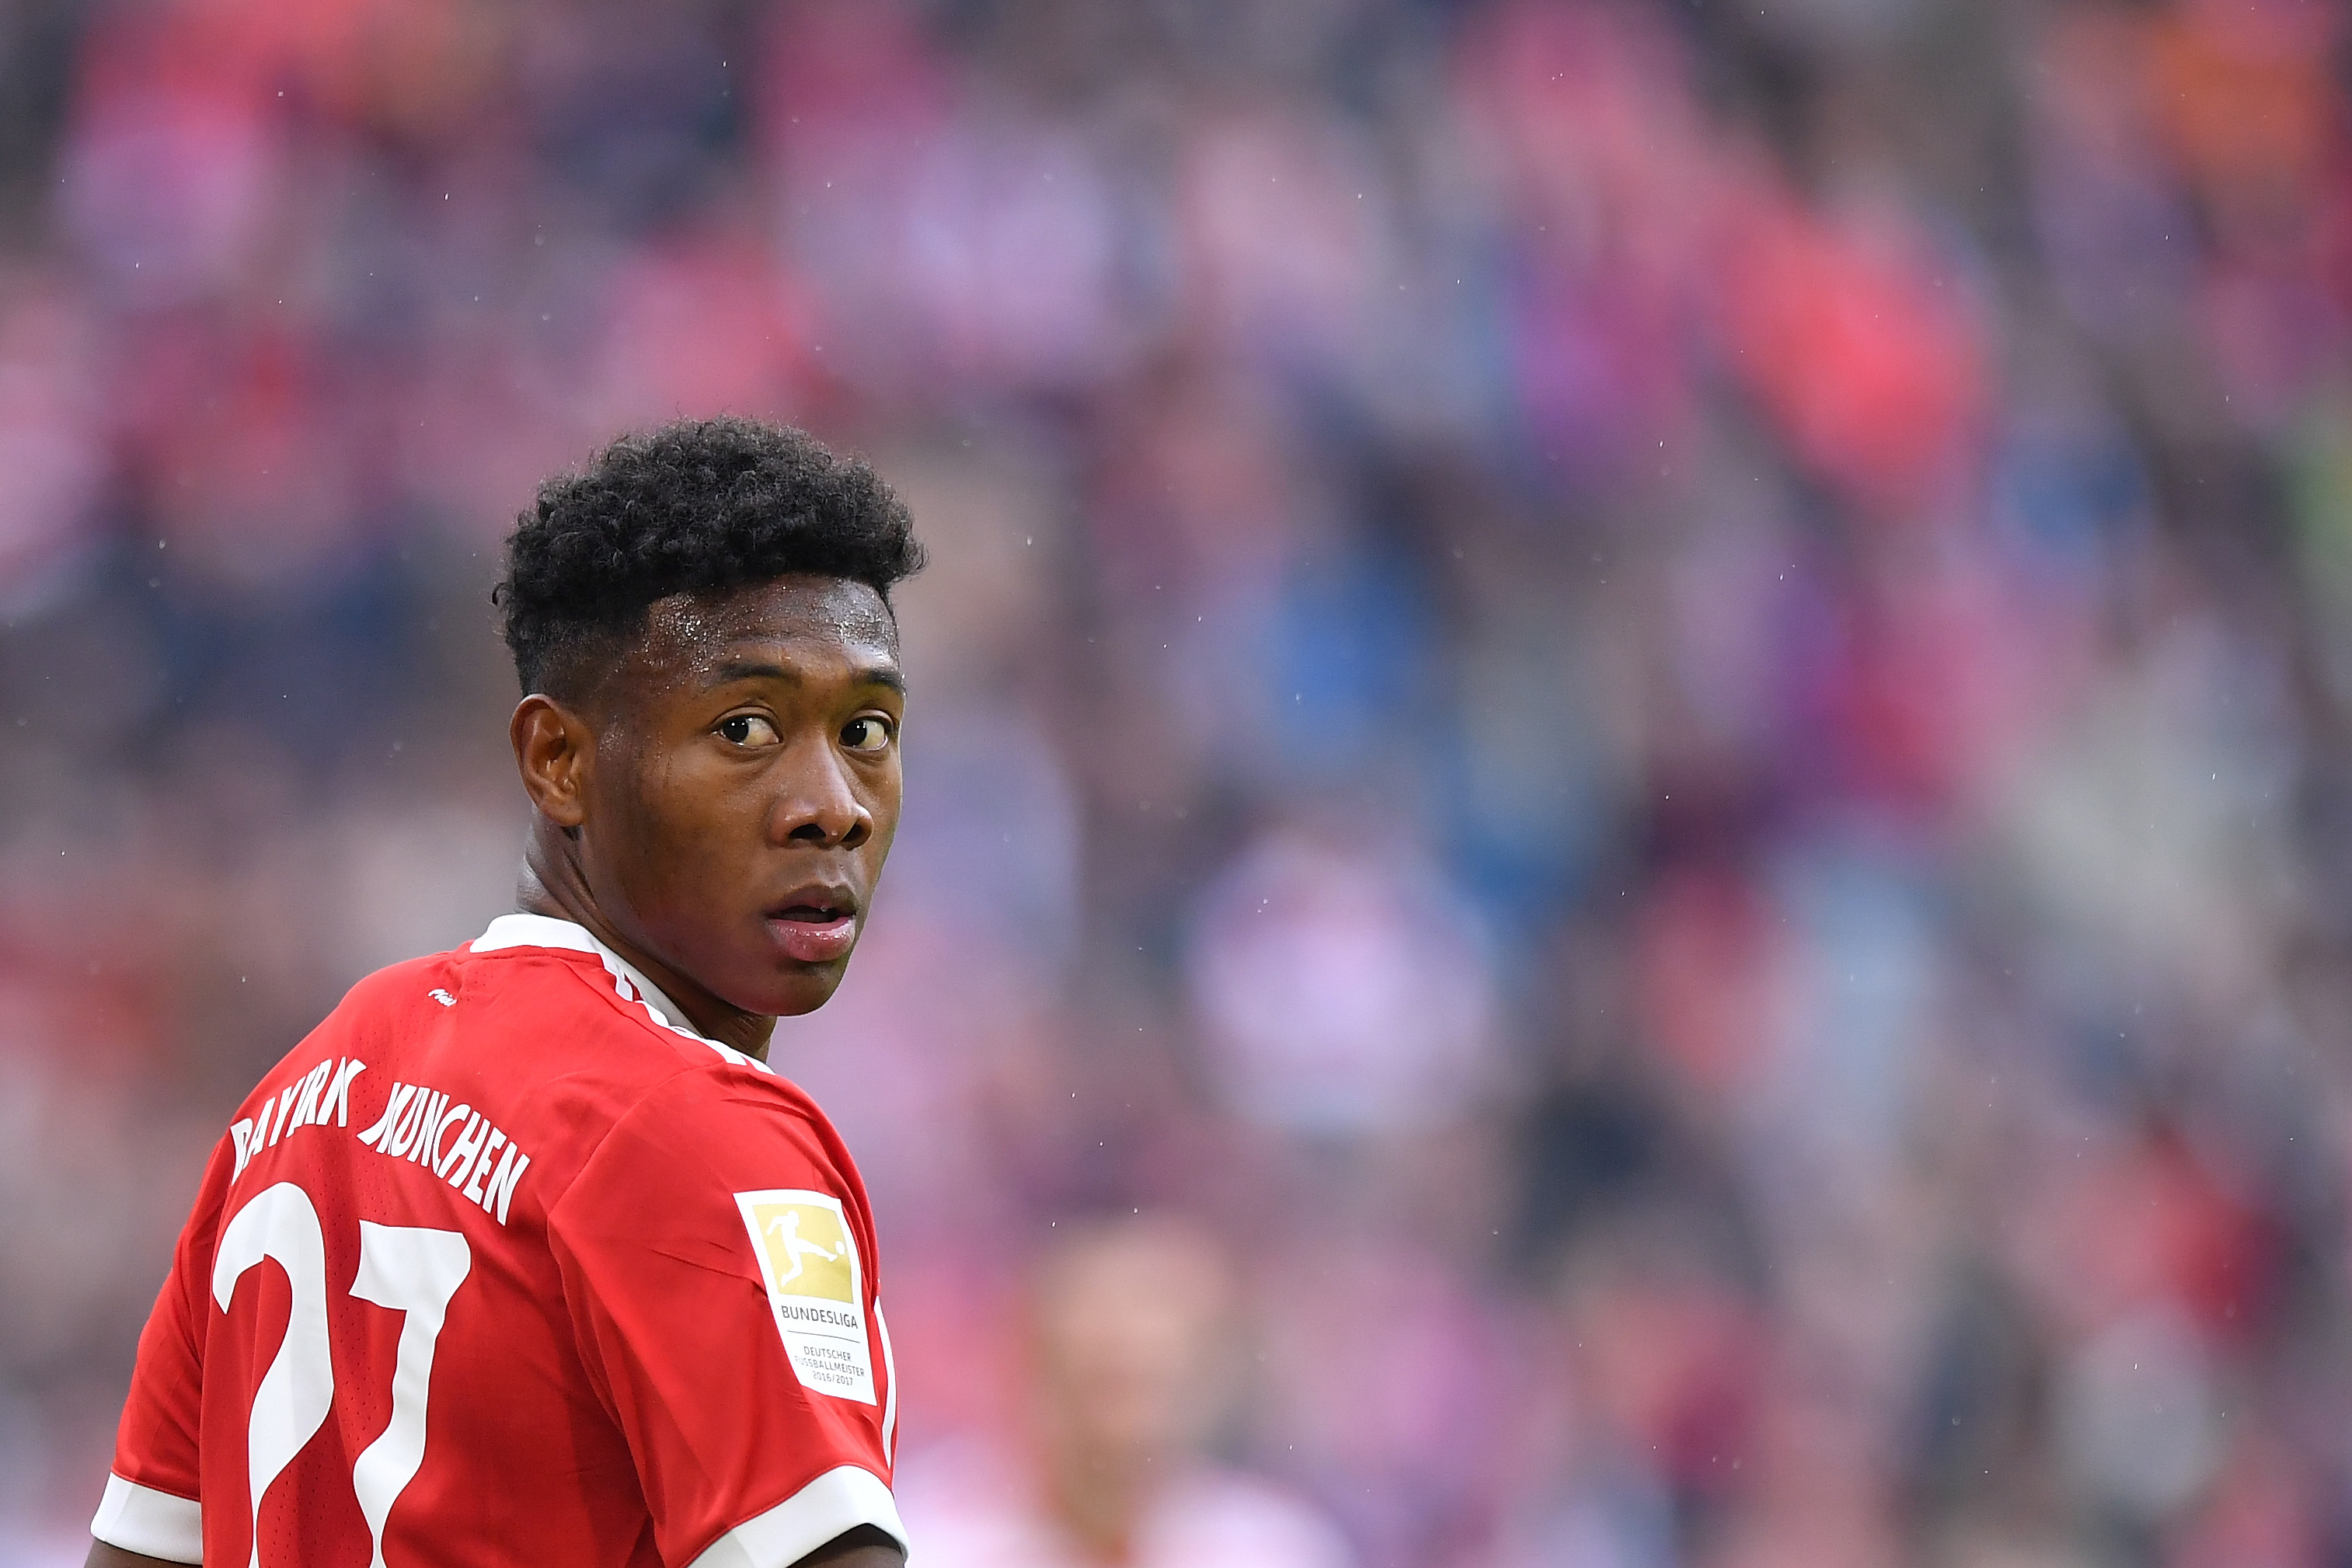 MUNICH, GERMANY - MARCH 10: David Alaba of Bayern Muenchen looks over his shoulder during the Bundesliga match between FC Bayern Muenchen and Hamburger SV at Allianz Arena on March 10, 2018 in Munich, Germany. (Photo by Sebastian Widmann/Bongarts/Getty Images)